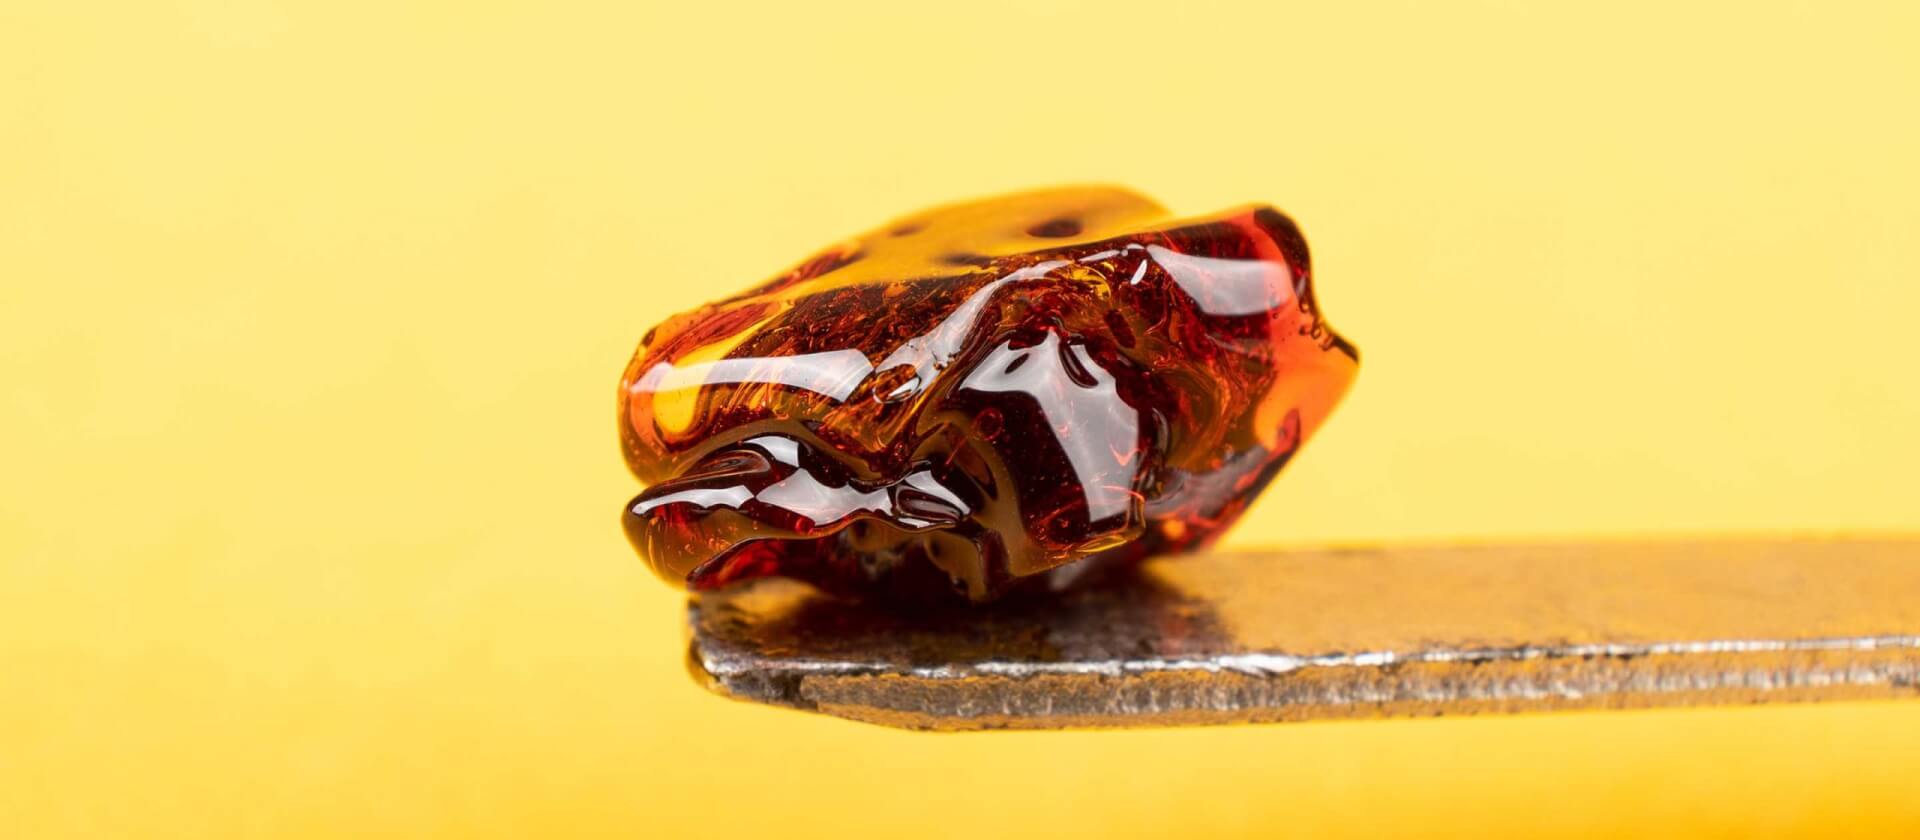 Are Dabs Bad For You? Complete Guide On Use And Side Effects